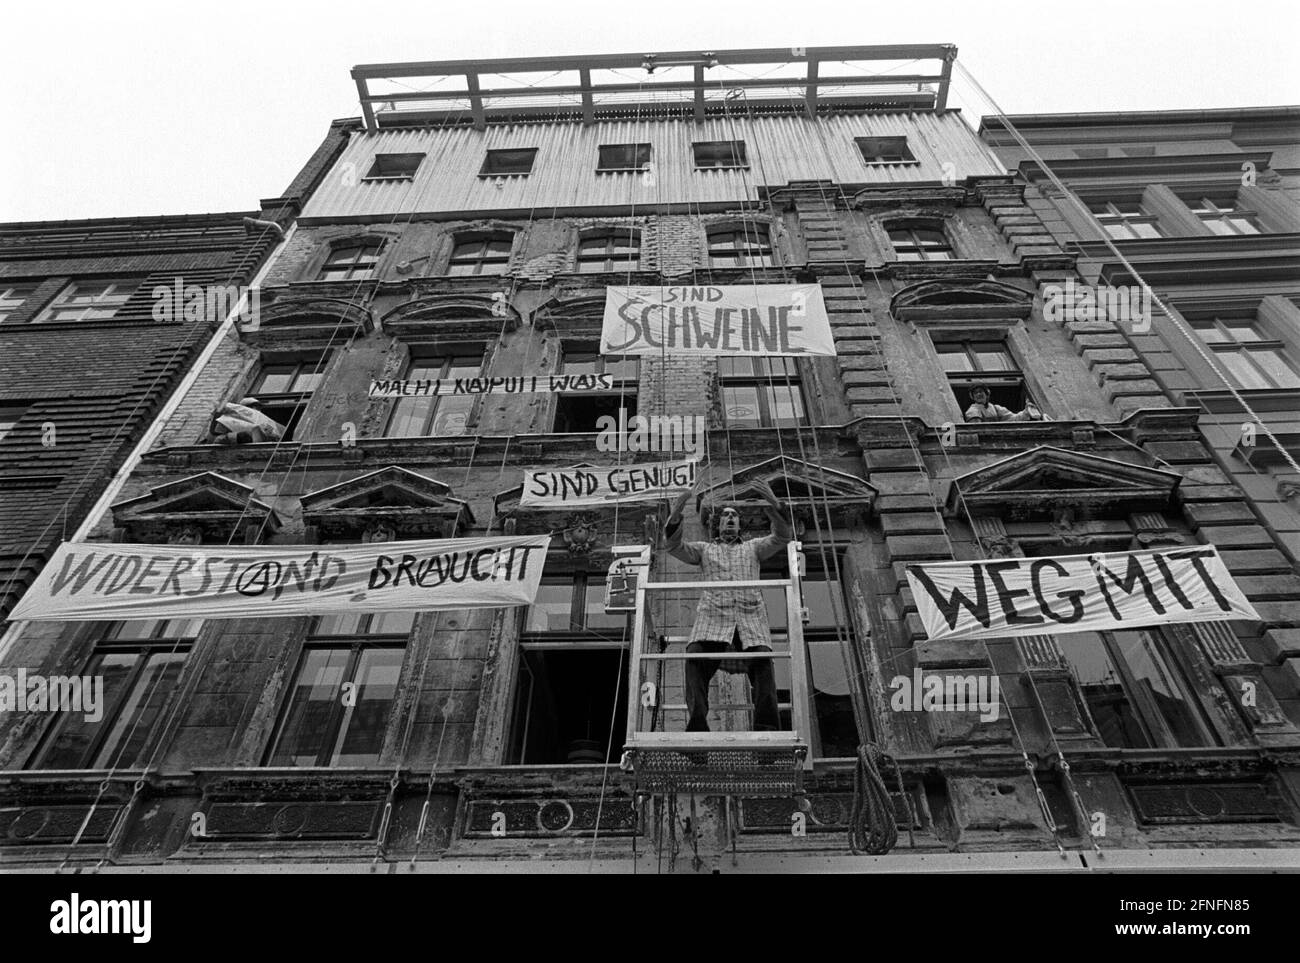 Germany, Berlin, 07.10.1998, the facade of Auguststraße 10 / KULE (Kultur und Leben), the house was renovated (and designed) by the former squatters, the facade was prepared for exhibitions, the KULE plays theatre and organizes actions, banners with old slogans, .... [automated translation] Stock Photo